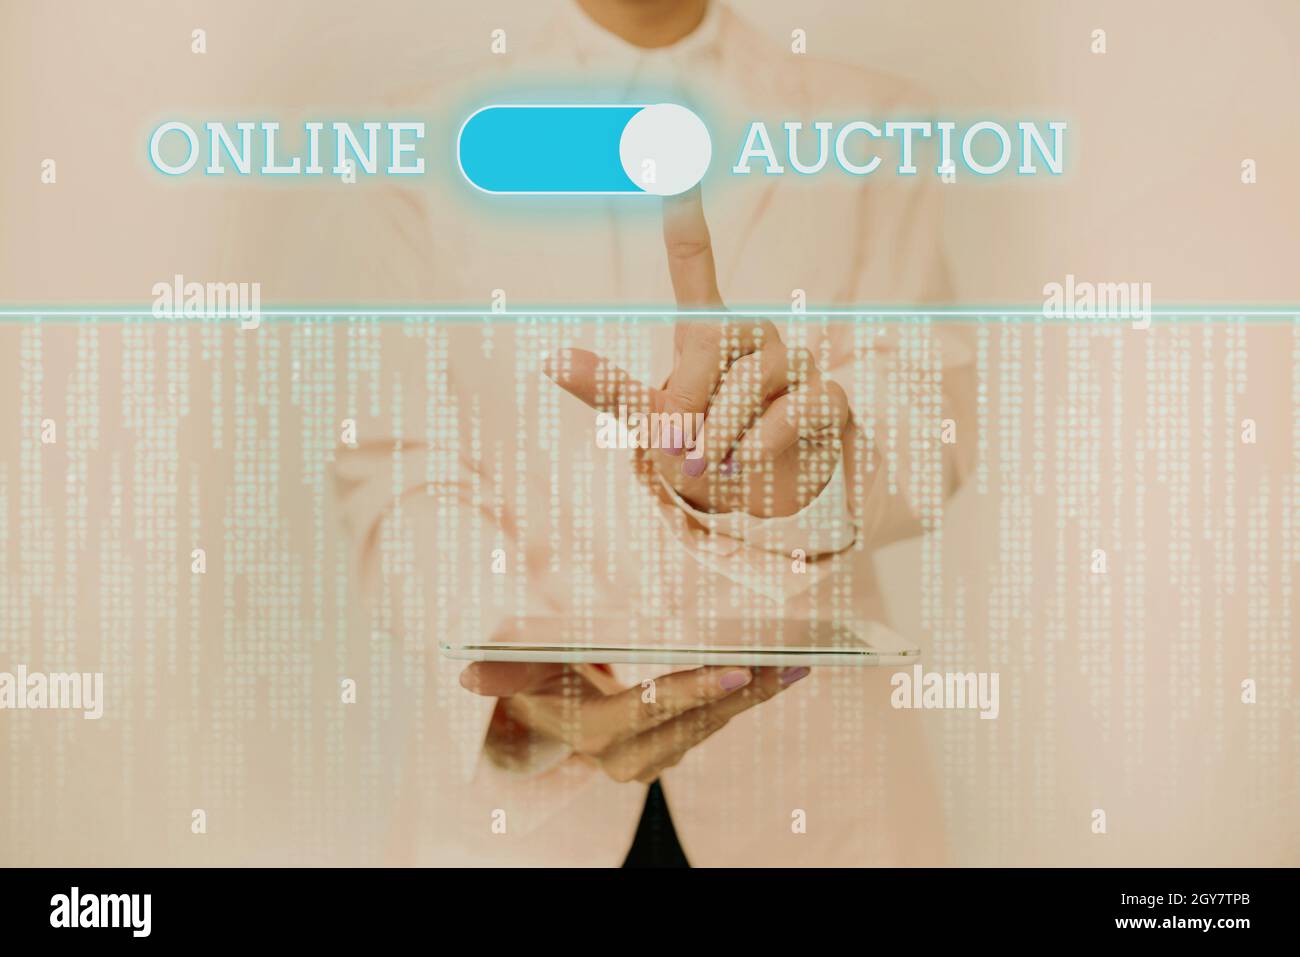 Writing displaying text Online Auction, Internet Concept digitized sale event which item is sold to the highest bidder Inspirational business technolo Stock Photo